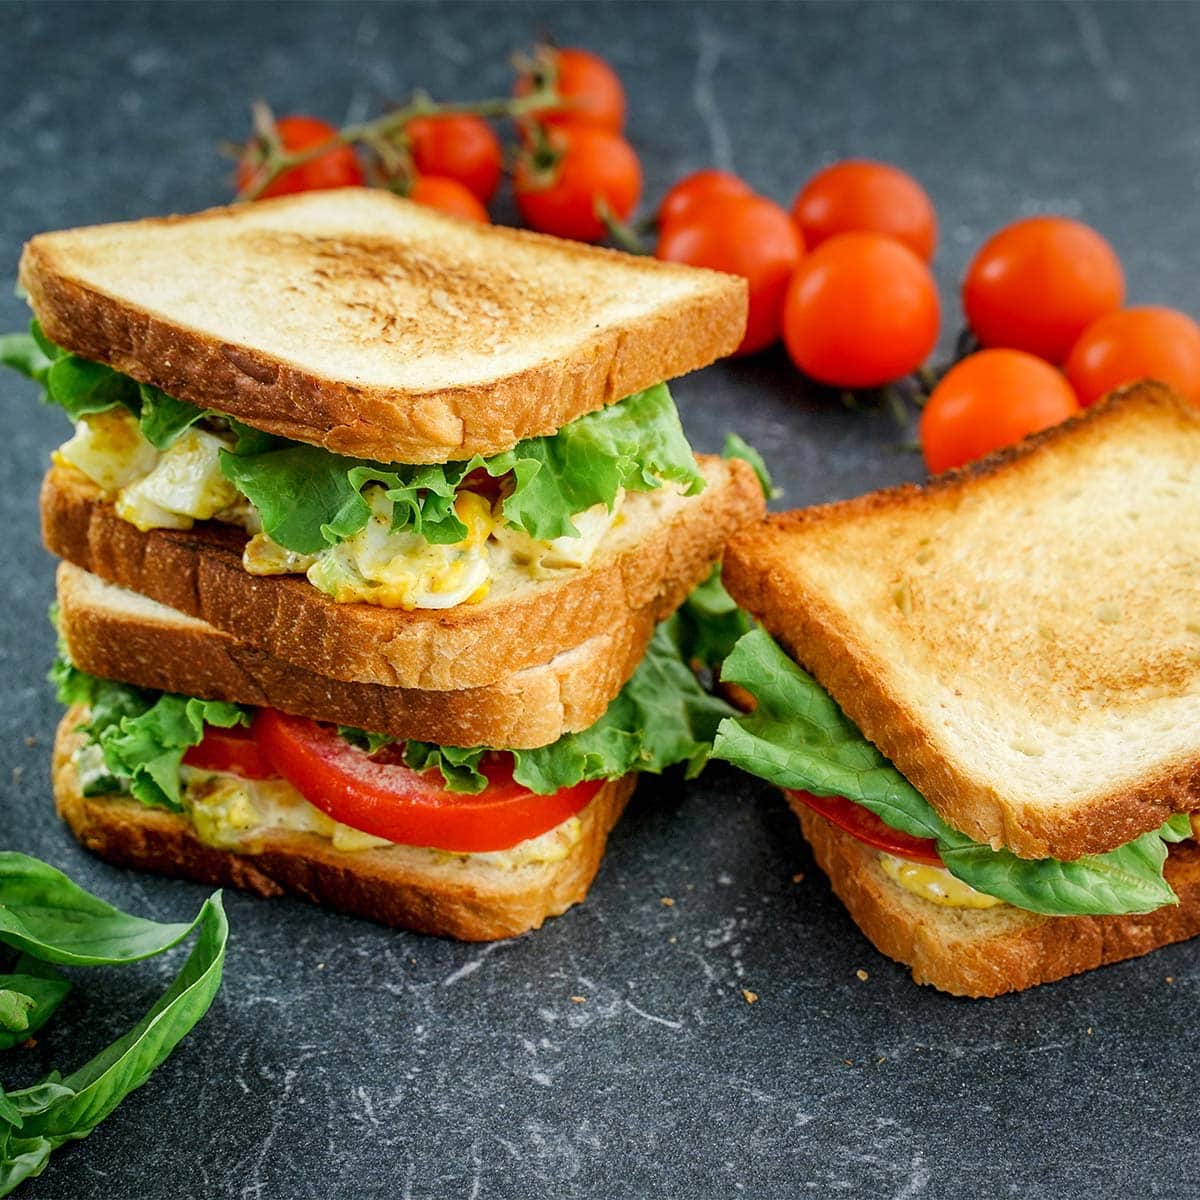 Three Egg salad sandwiches with cherry tomatoes.